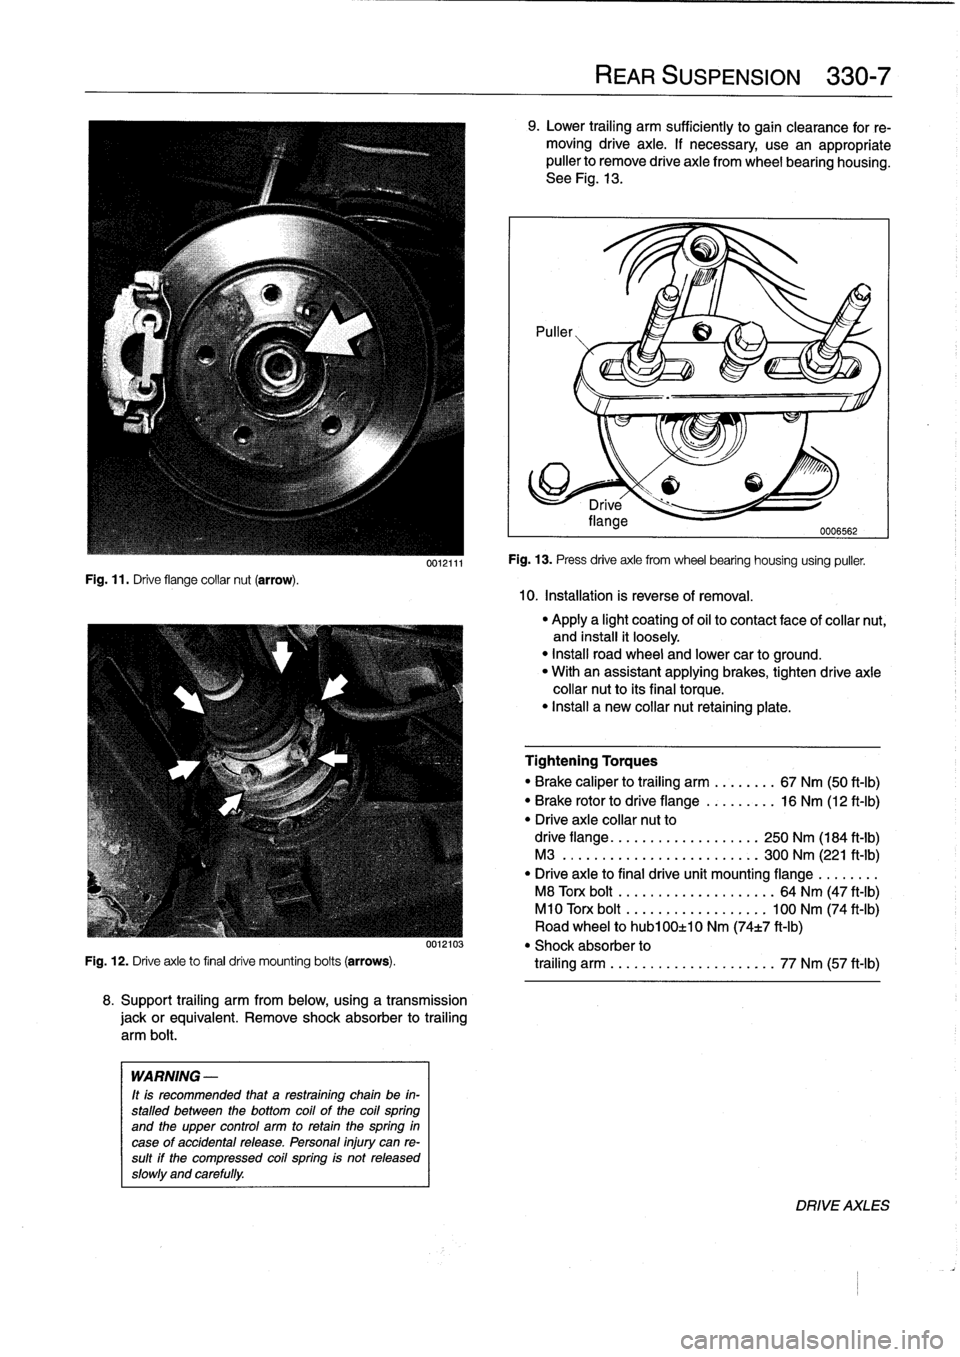 BMW 328i 1994 E36 Owners Guide 
Fig
.
11
.
Drive
flange
collar
nut
(arrow)
.

0012111

8
.
Support
trailing
arm
from
below,
using
a
transmission

jackorequivalent
.
Remove
shock
absorber
to
trailing

arm
bolt
.

WARNING
-

It
is
re